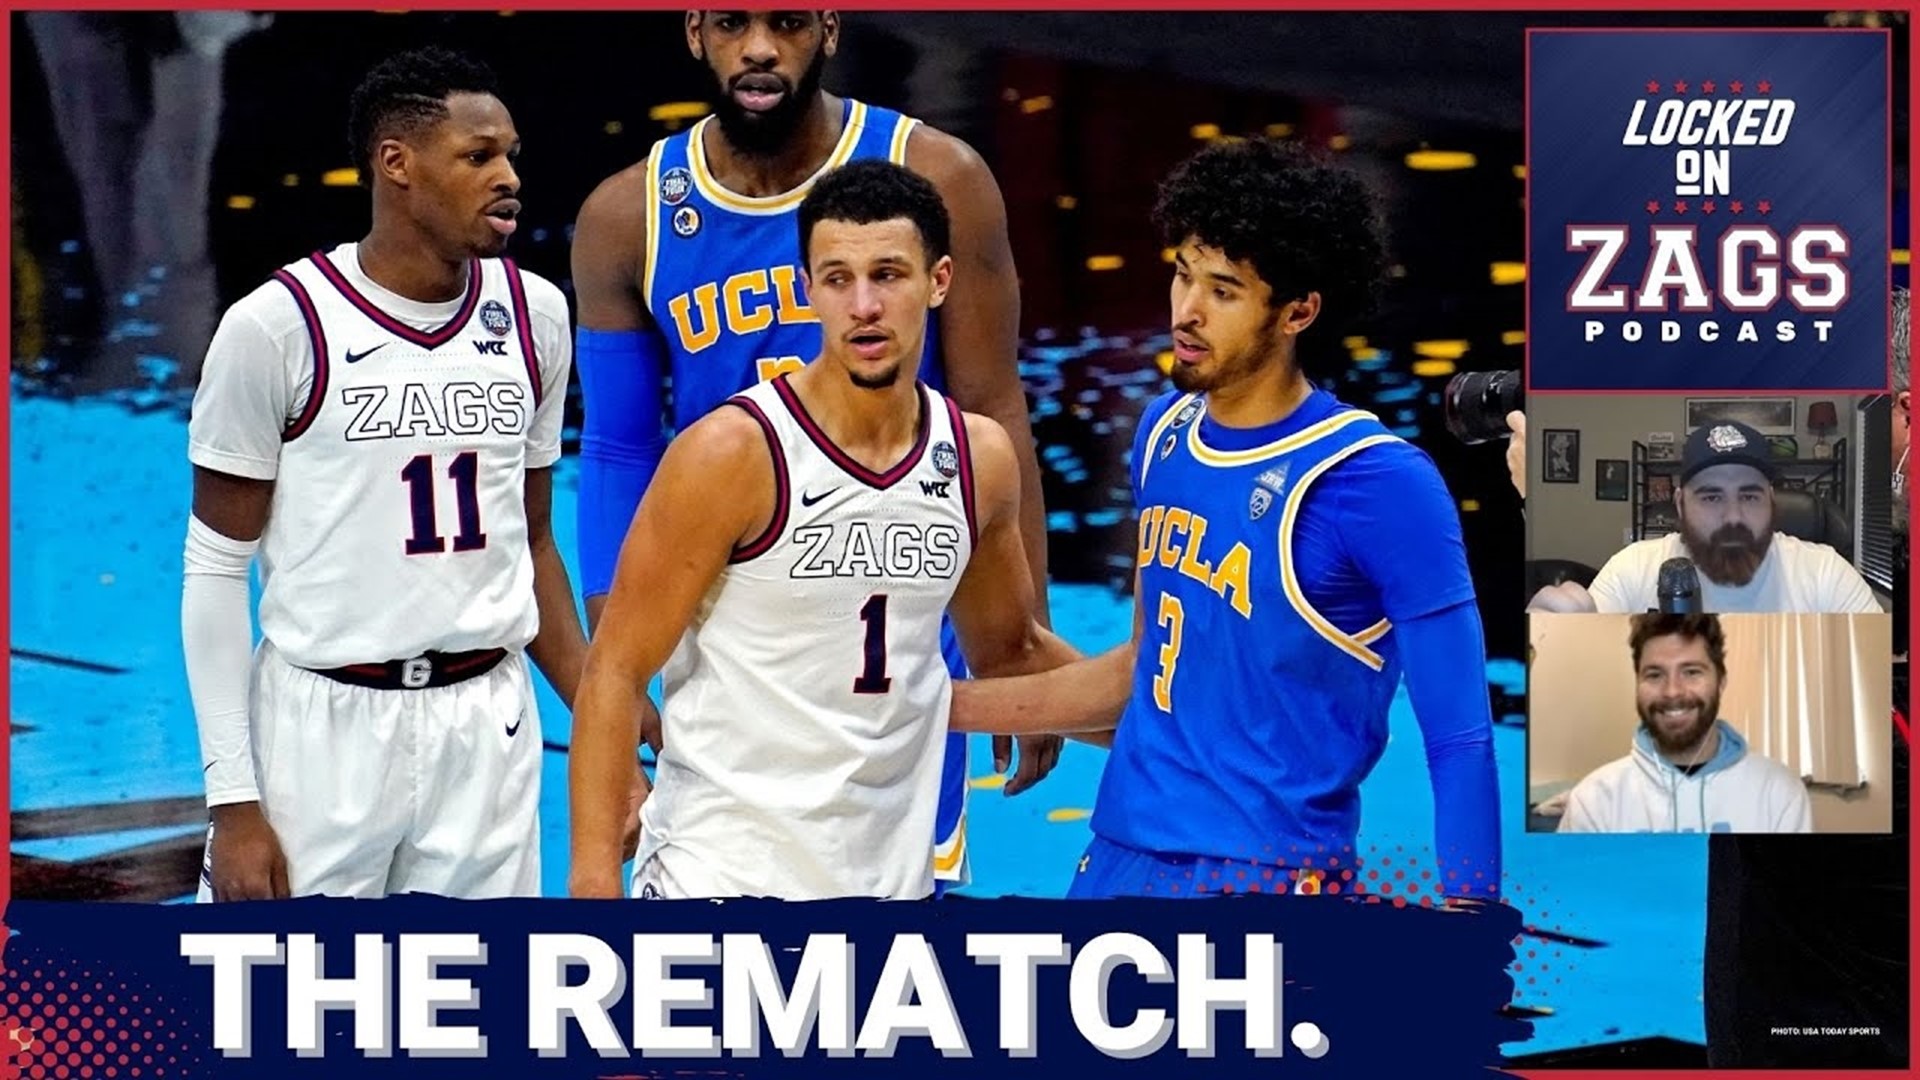 The Gonzaga Bulldogs and UCLA Bruins will meet once again in the NCAA Tournament, a rematch of 2006 with Adam Morrison's tears and a rematch of 2021 when Jalen Suggs